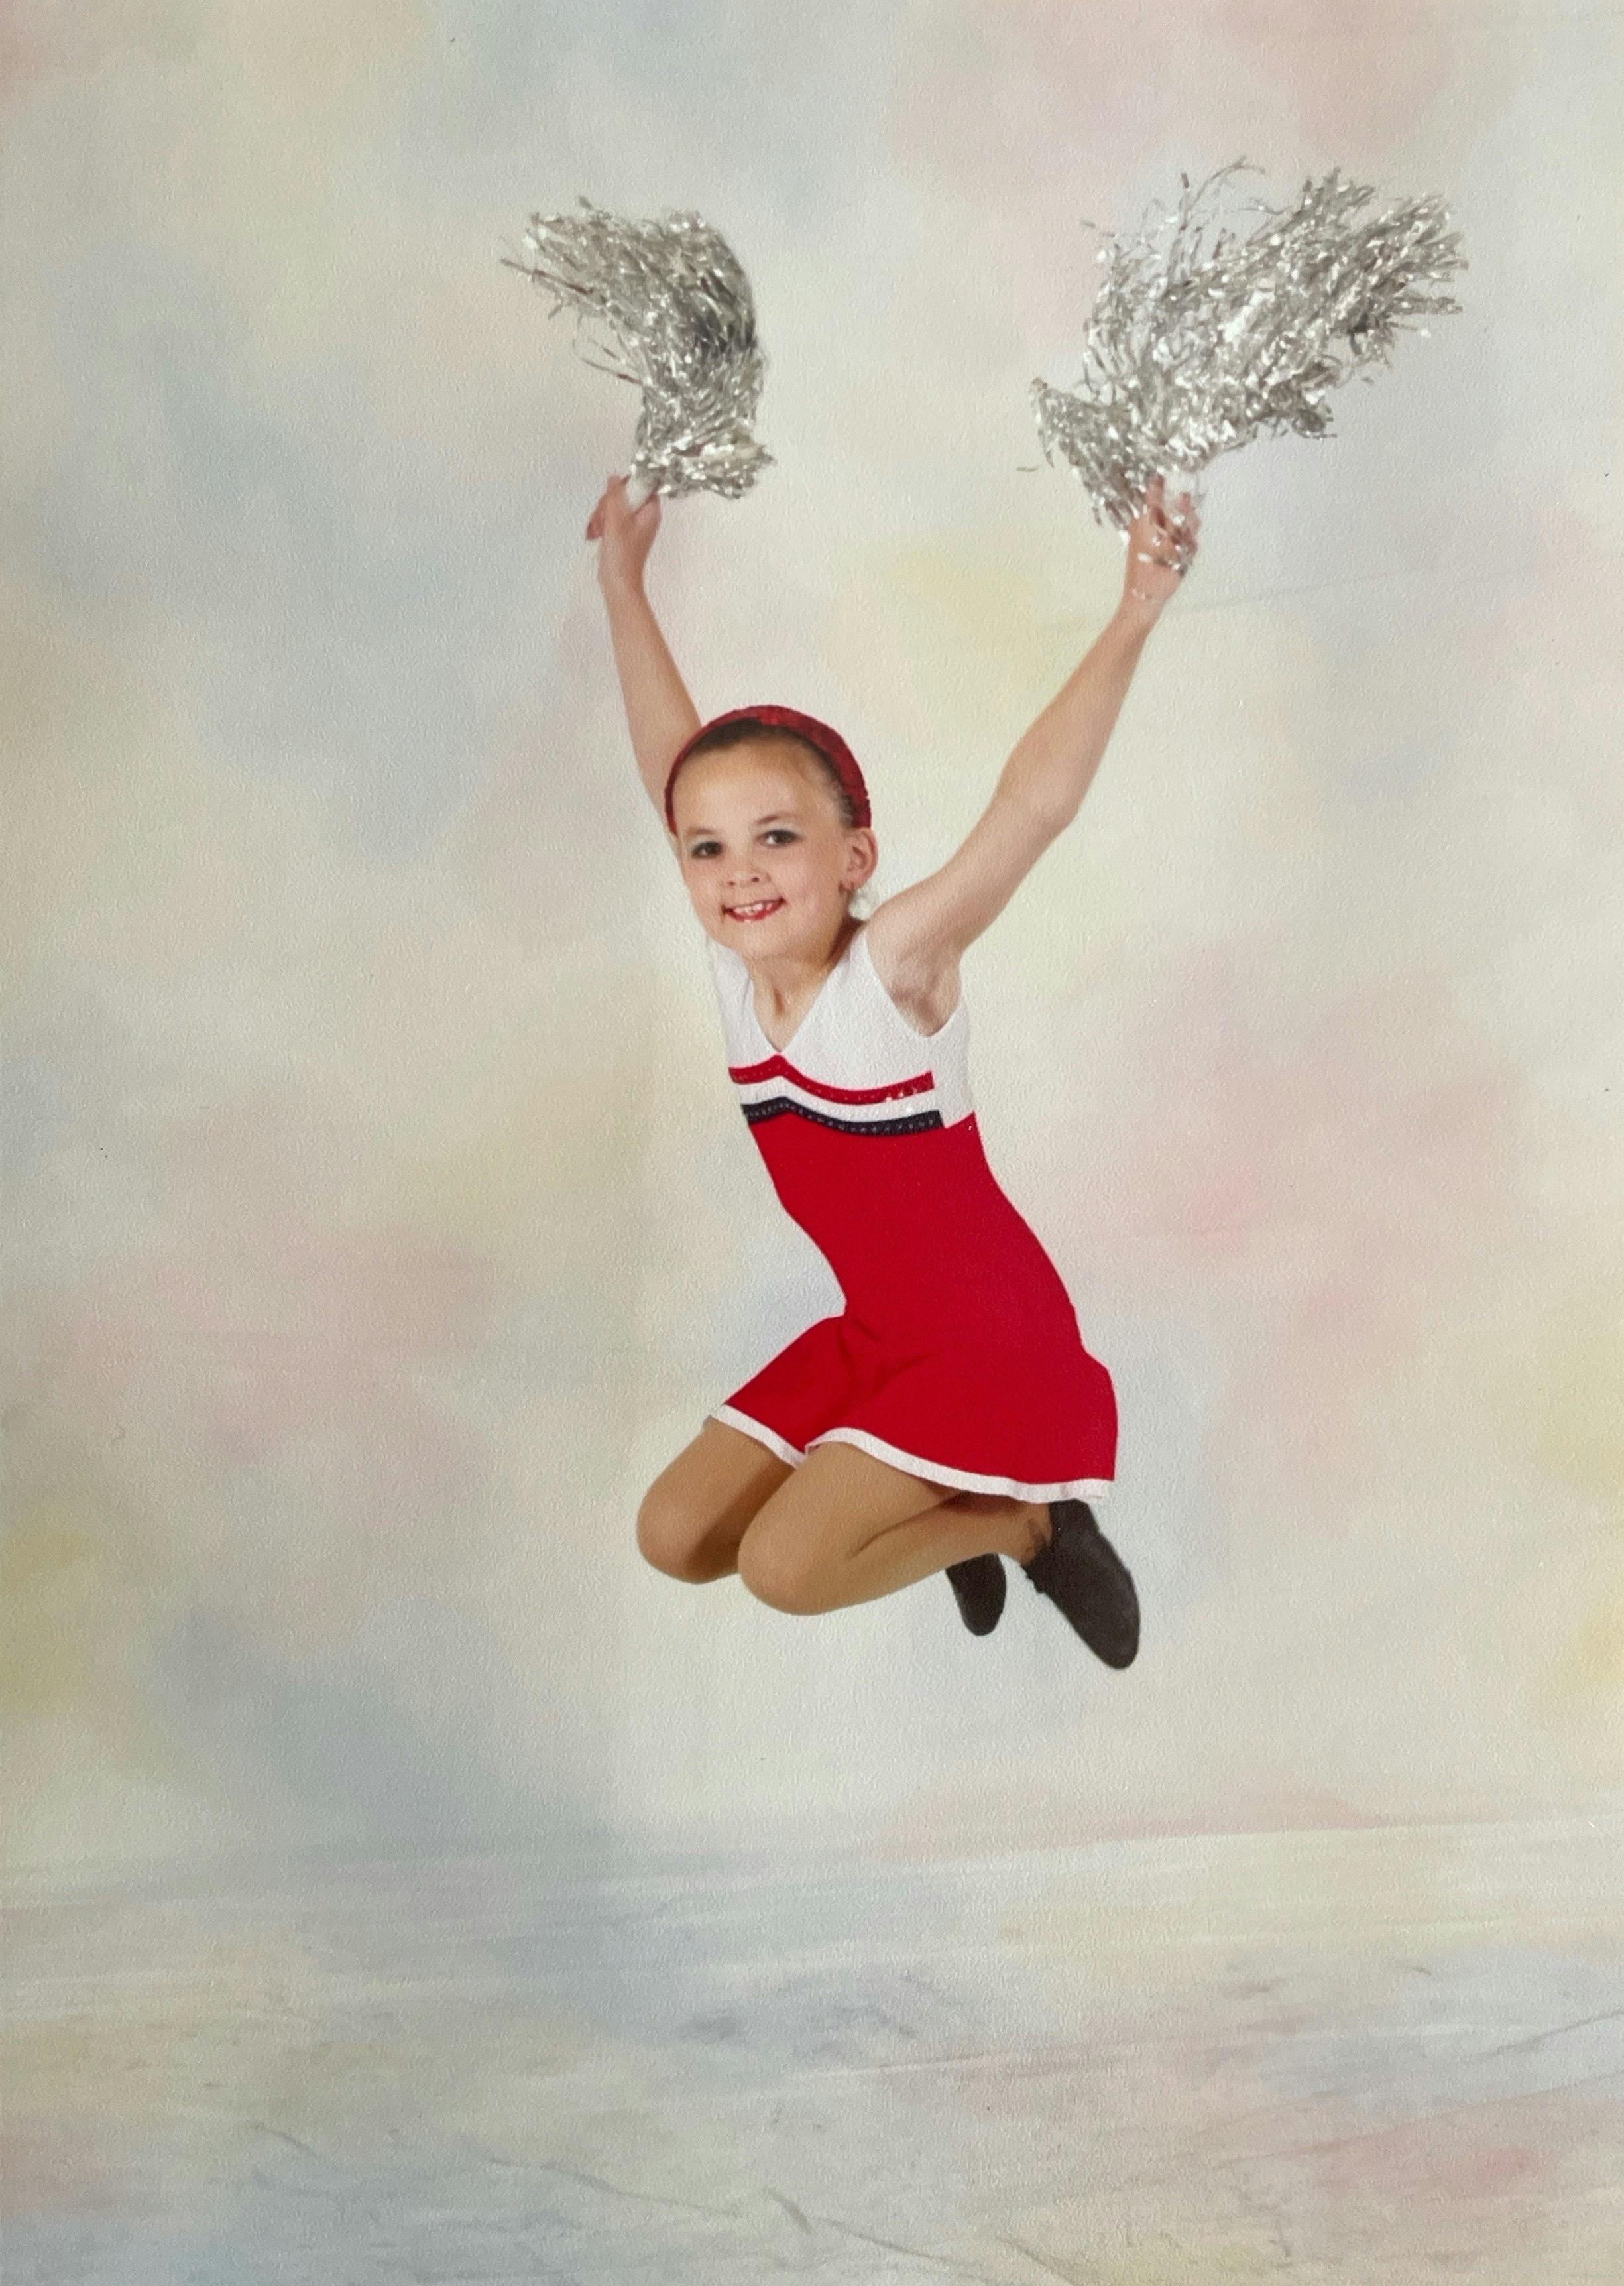 Young Isabelle jumping for a cheer photoshoot